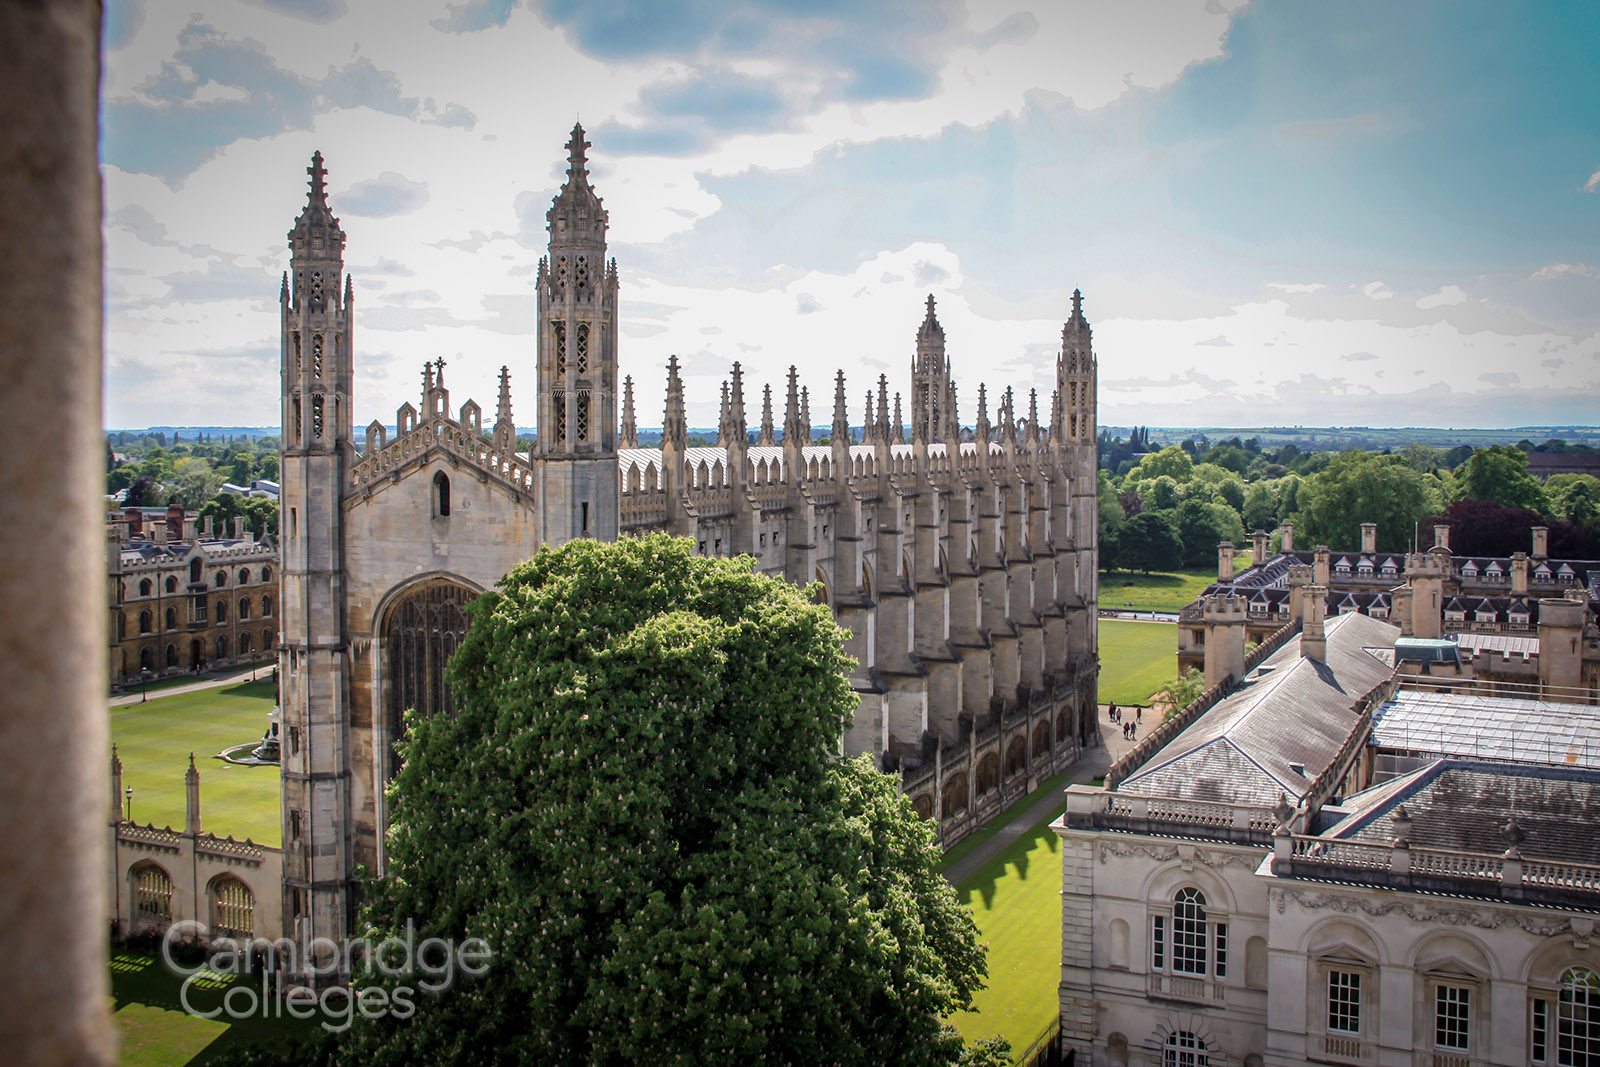 King's college chape as viewed from the tower of Great St Mary's church